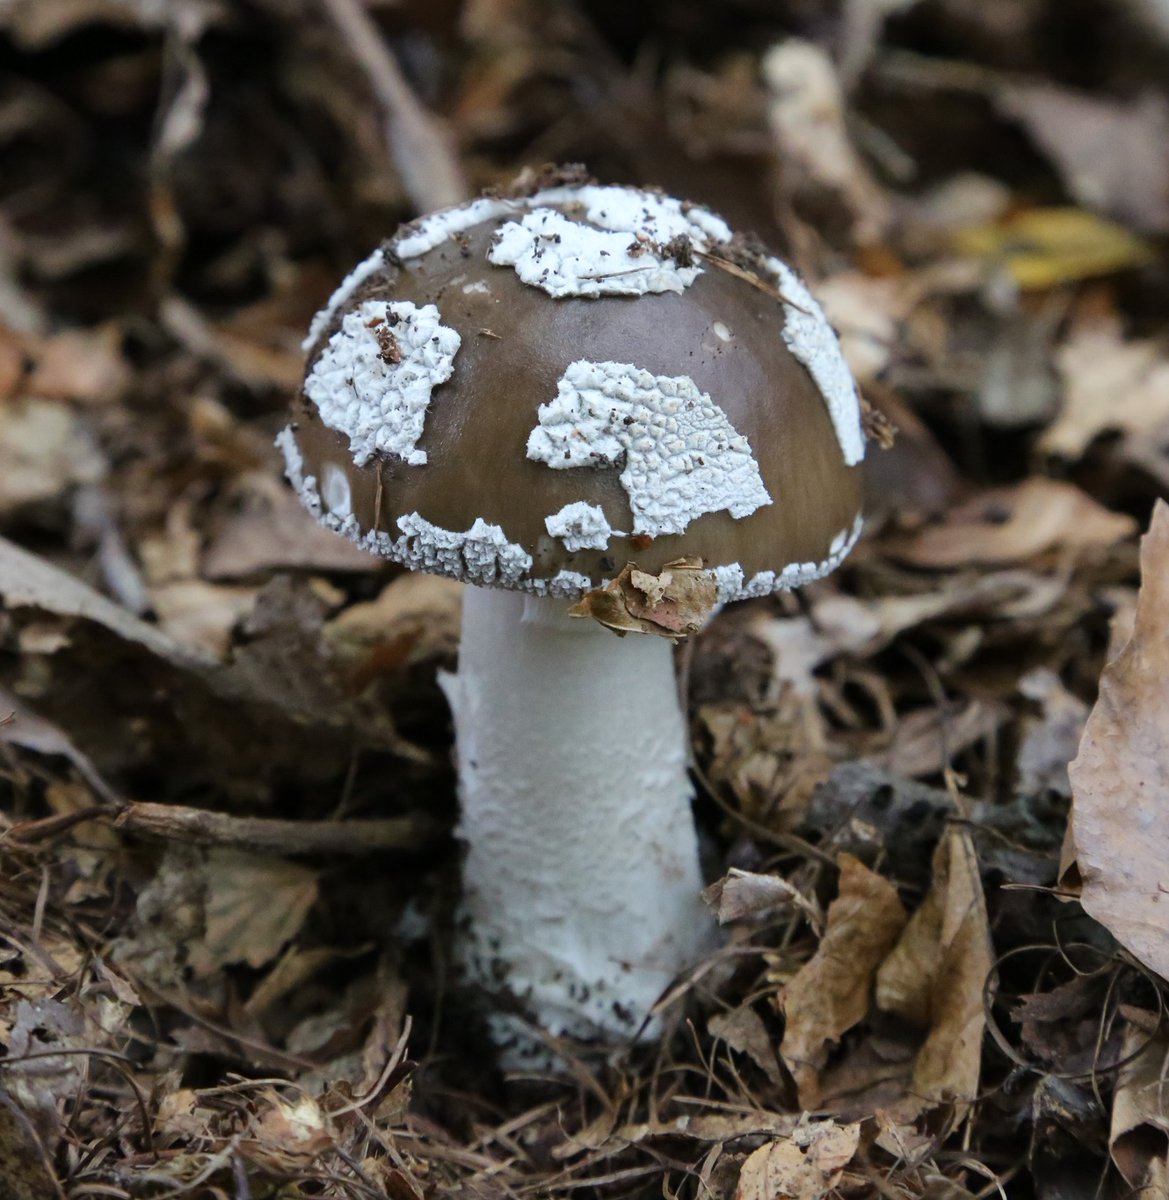 Our next outing is on Saturday 21st October to Bargain Wood - 12 miles south of Monmouth. If interested go to our website for details of how to join us. gwentfungi.org.uk #Fungi